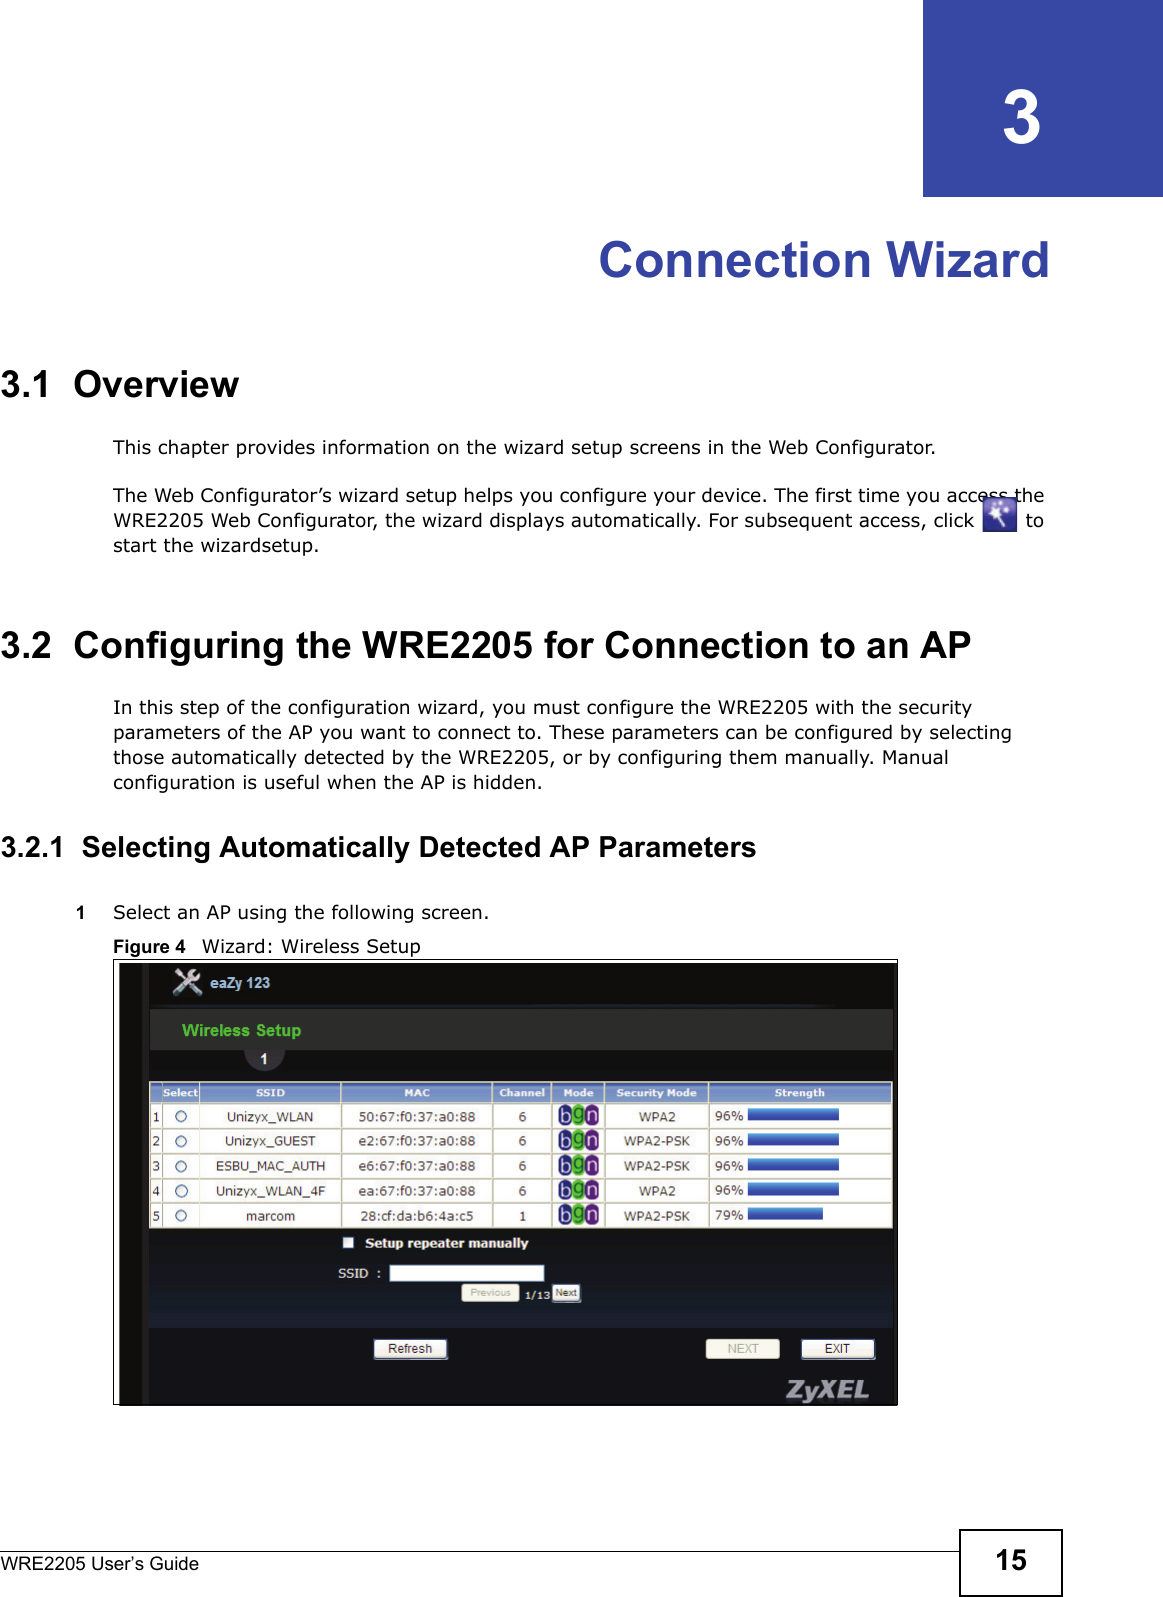 WRE2205 User’s Guide 15CHAPTER   3Connection Wizard3.1  OverviewThis chapter provides information on the wizard setup screens in the Web Configurator.The Web Configurator’s wizard setup helps you configure your device. The first time you access the WRE2205 Web Configurator, the wizard displays automatically. For subsequent access, click   to start the wizardsetup.3.2  Configuring the WRE2205 for Connection to an APIn this step of the configuration wizard, you must configure the WRE2205 with the security parameters of the AP you want to connect to. These parameters can be configured by selecting those automatically detected by the WRE2205, or by configuring them manually. Manual configuration is useful when the AP is hidden.3.2.1  Selecting Automatically Detected AP Parameters1Select an AP using the following screen.Figure 4   Wizard: Wireless Setup